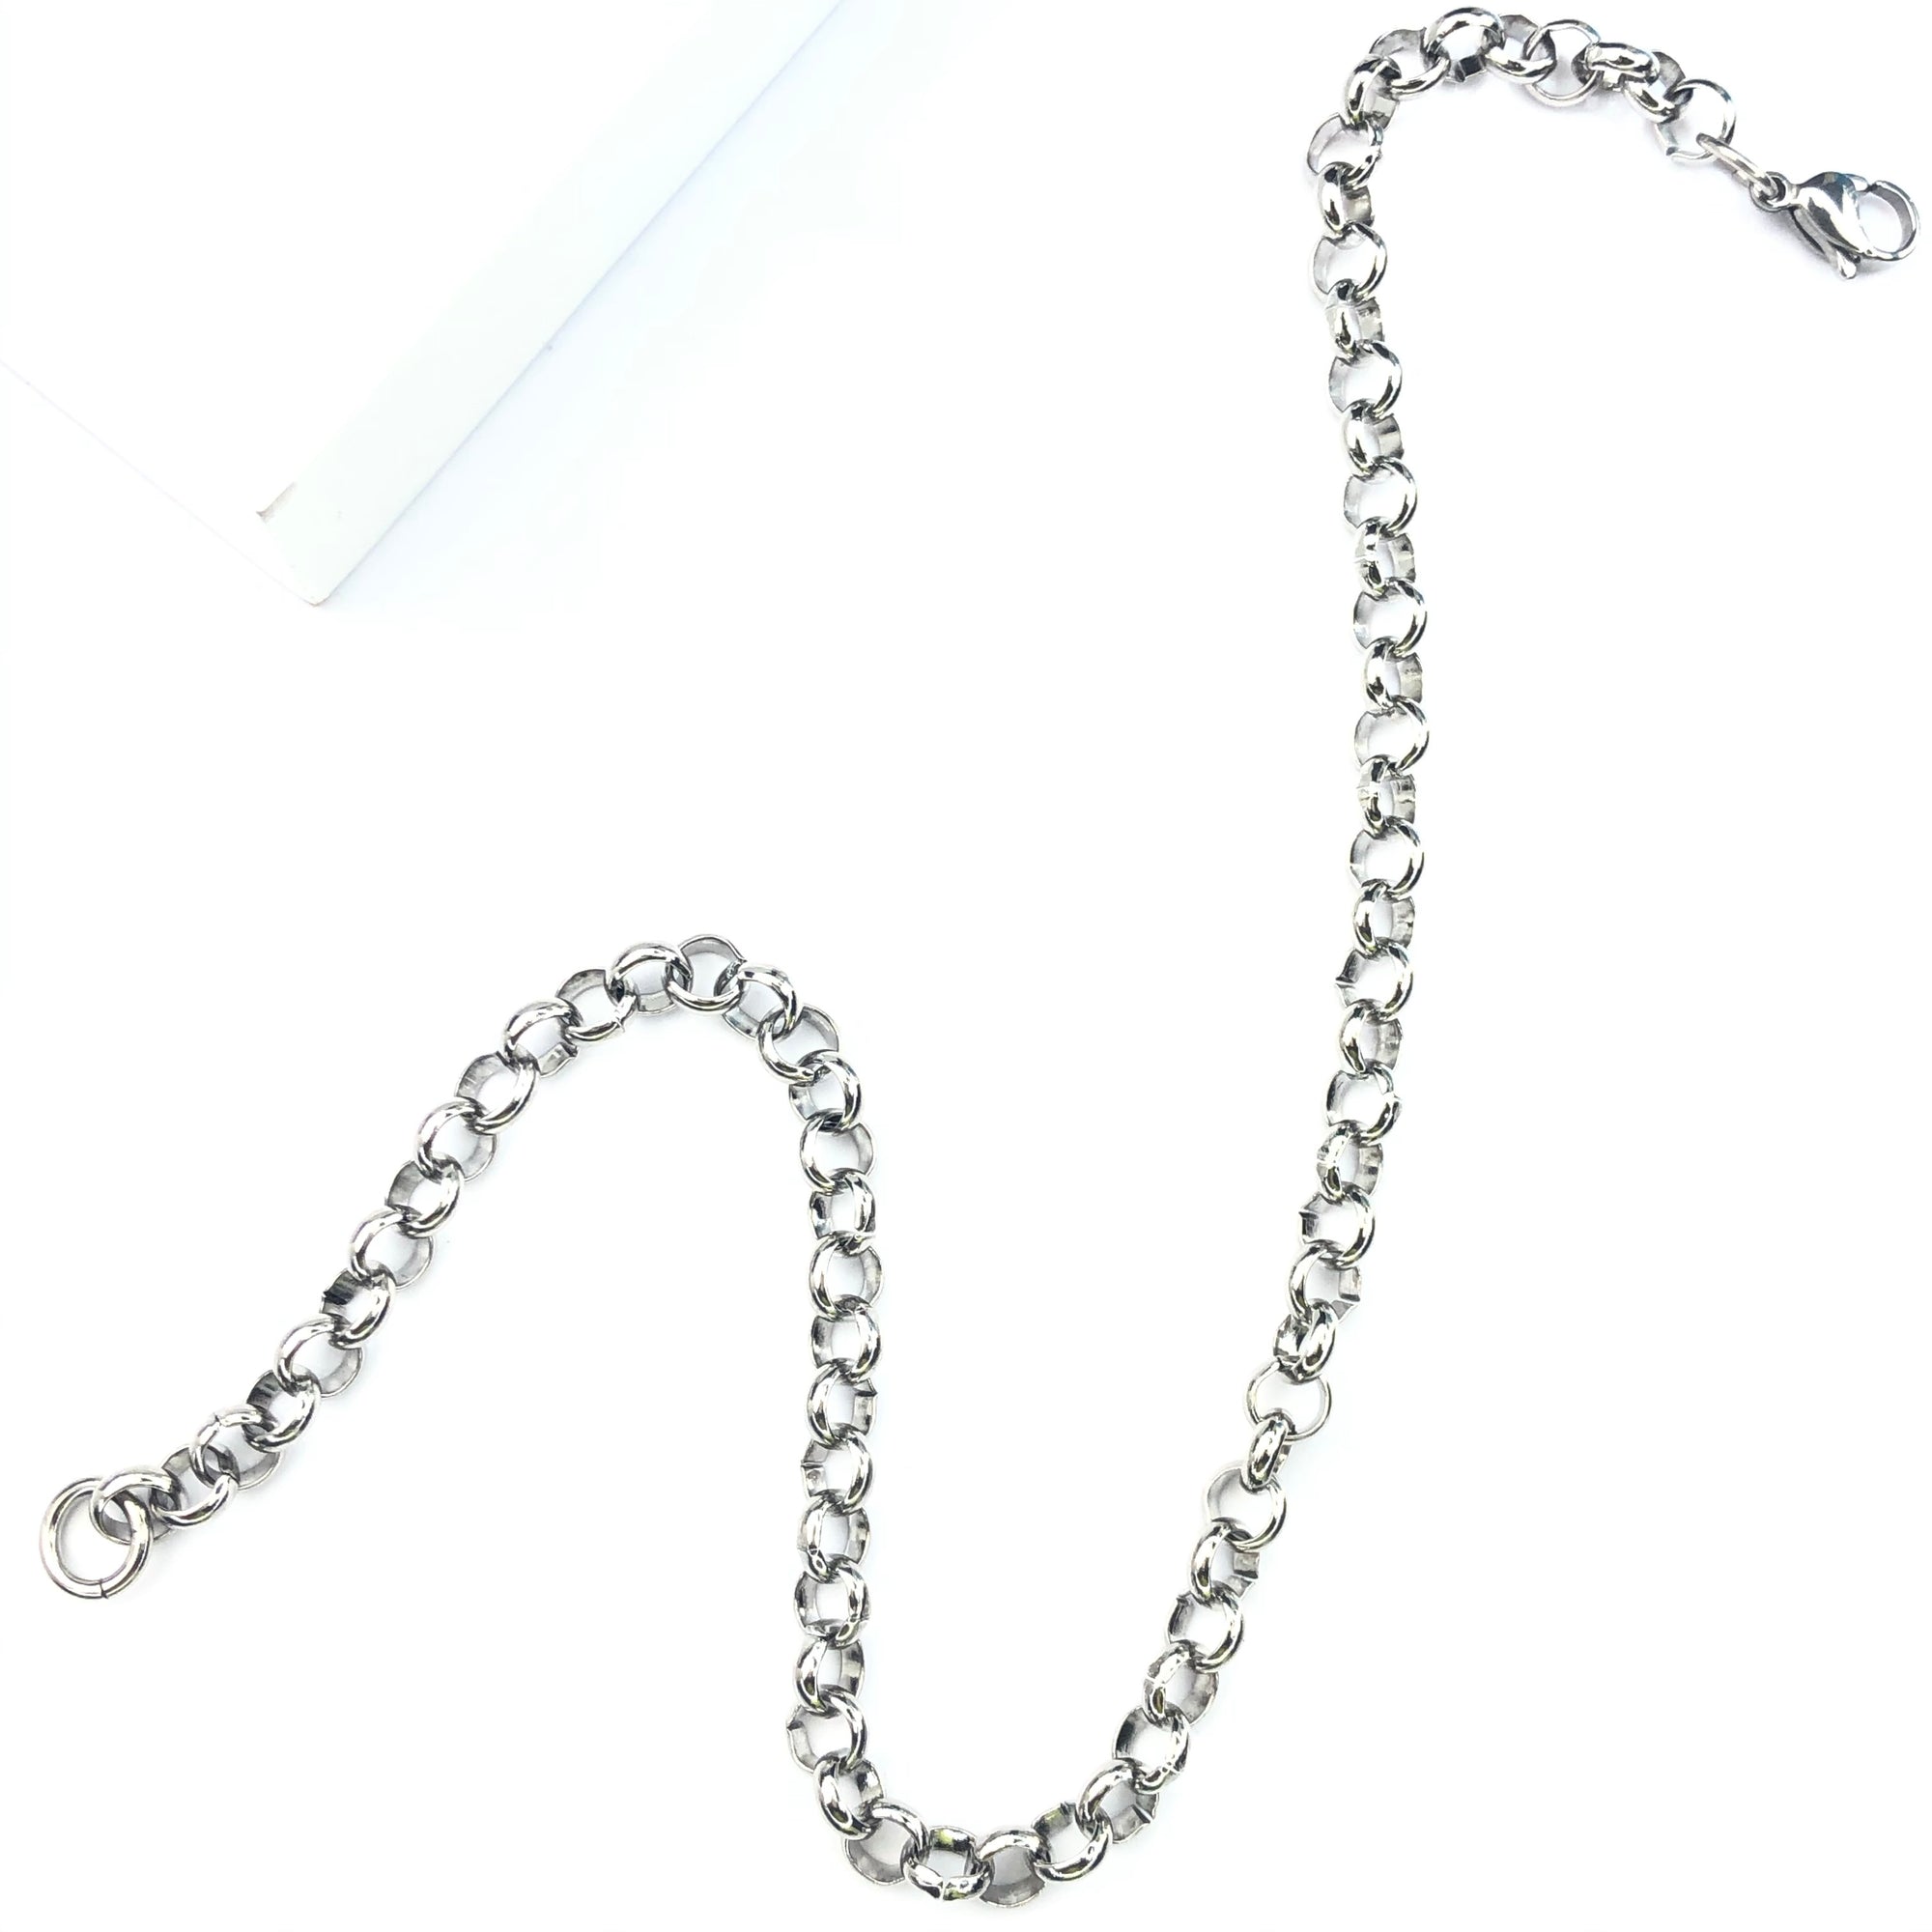 EXT13927 Small 12" Extension Chain Cerese D, Inc. Silver  